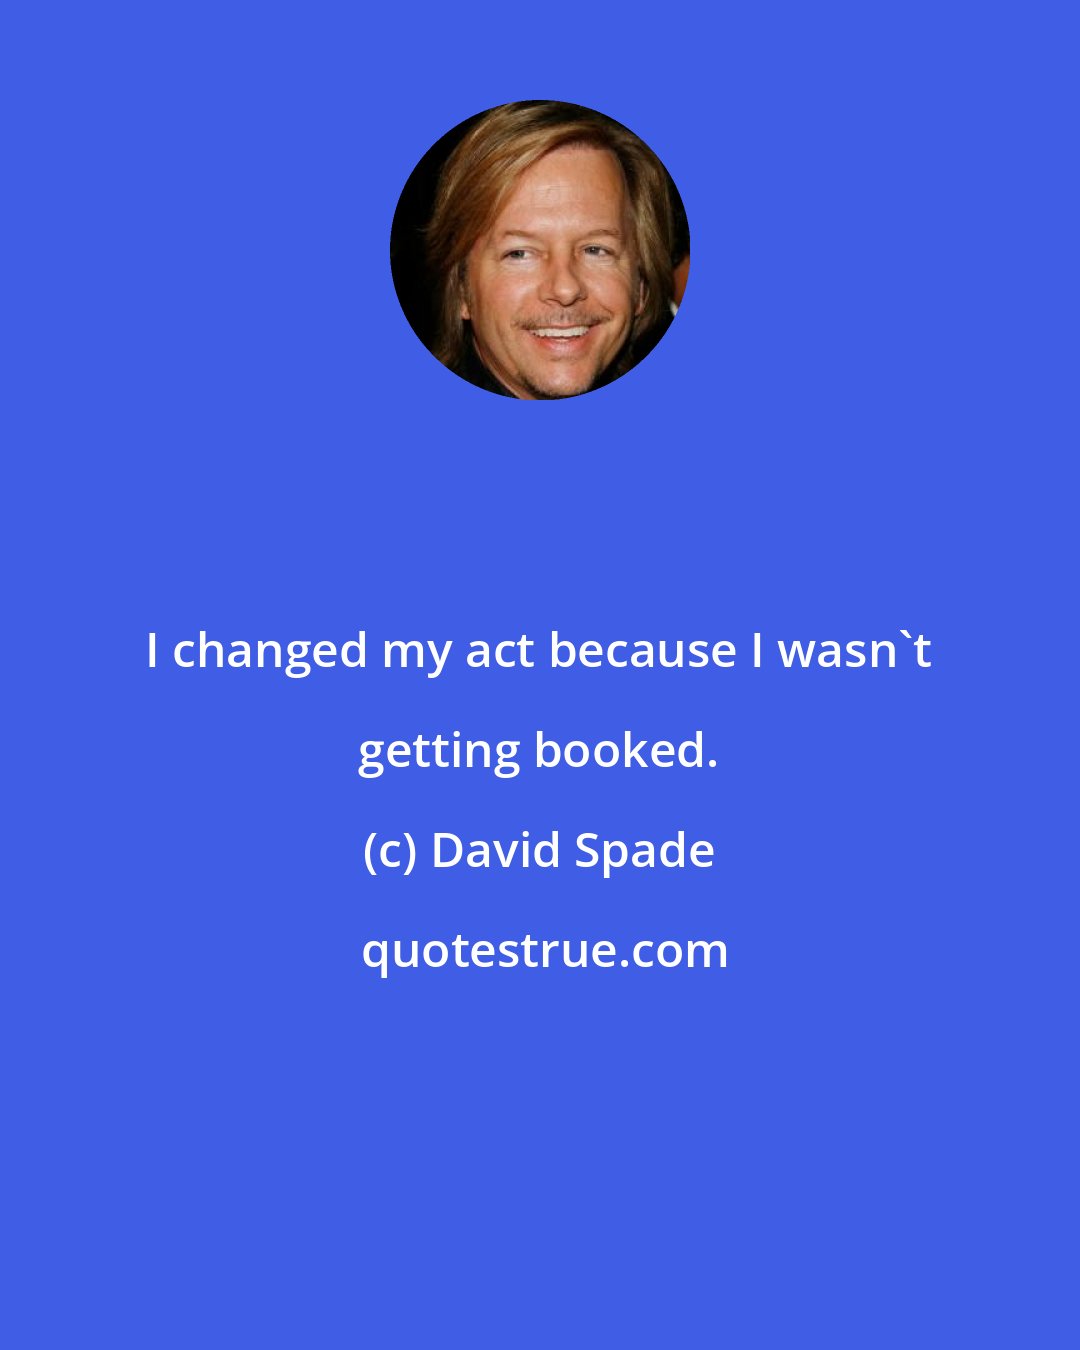 David Spade: I changed my act because I wasn't getting booked.